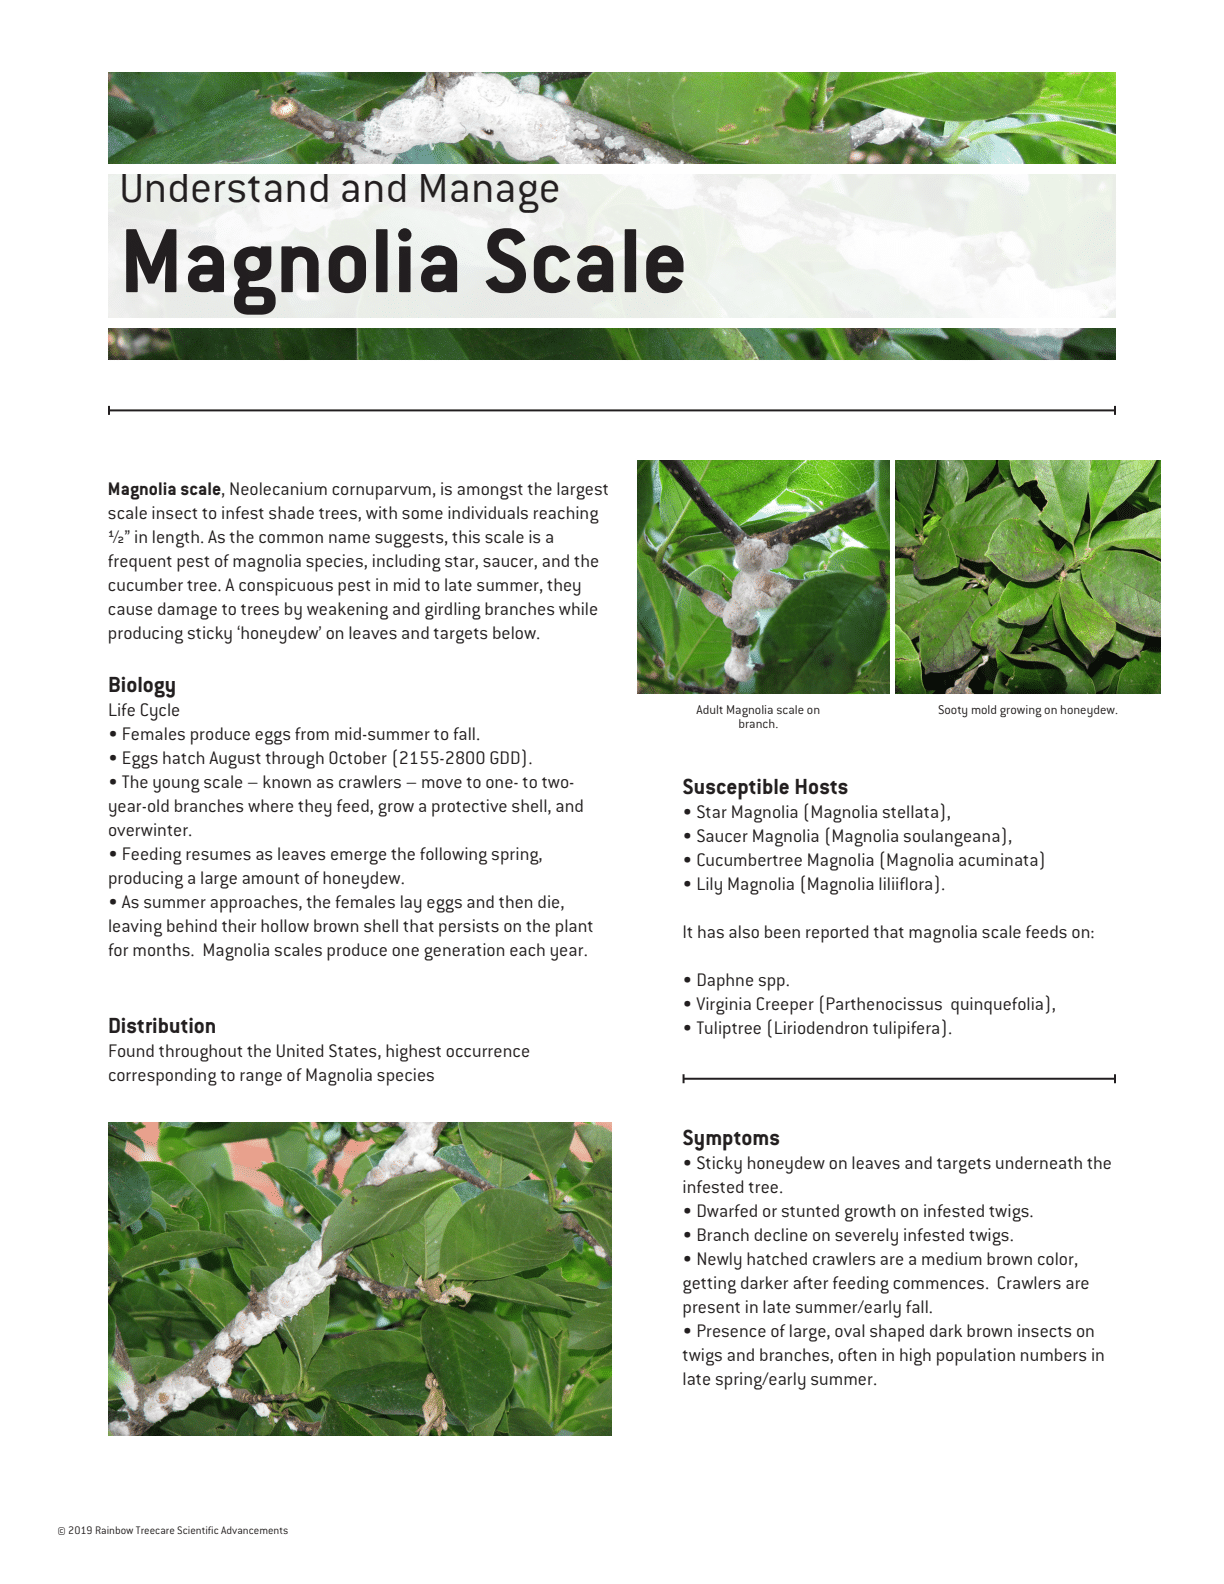 This informational document details how to understand and manage Magnolia Scale, an insect pest, including its biology, life cycle, distribution, susceptible hosts, and symptoms. Images show scale insects on branches.